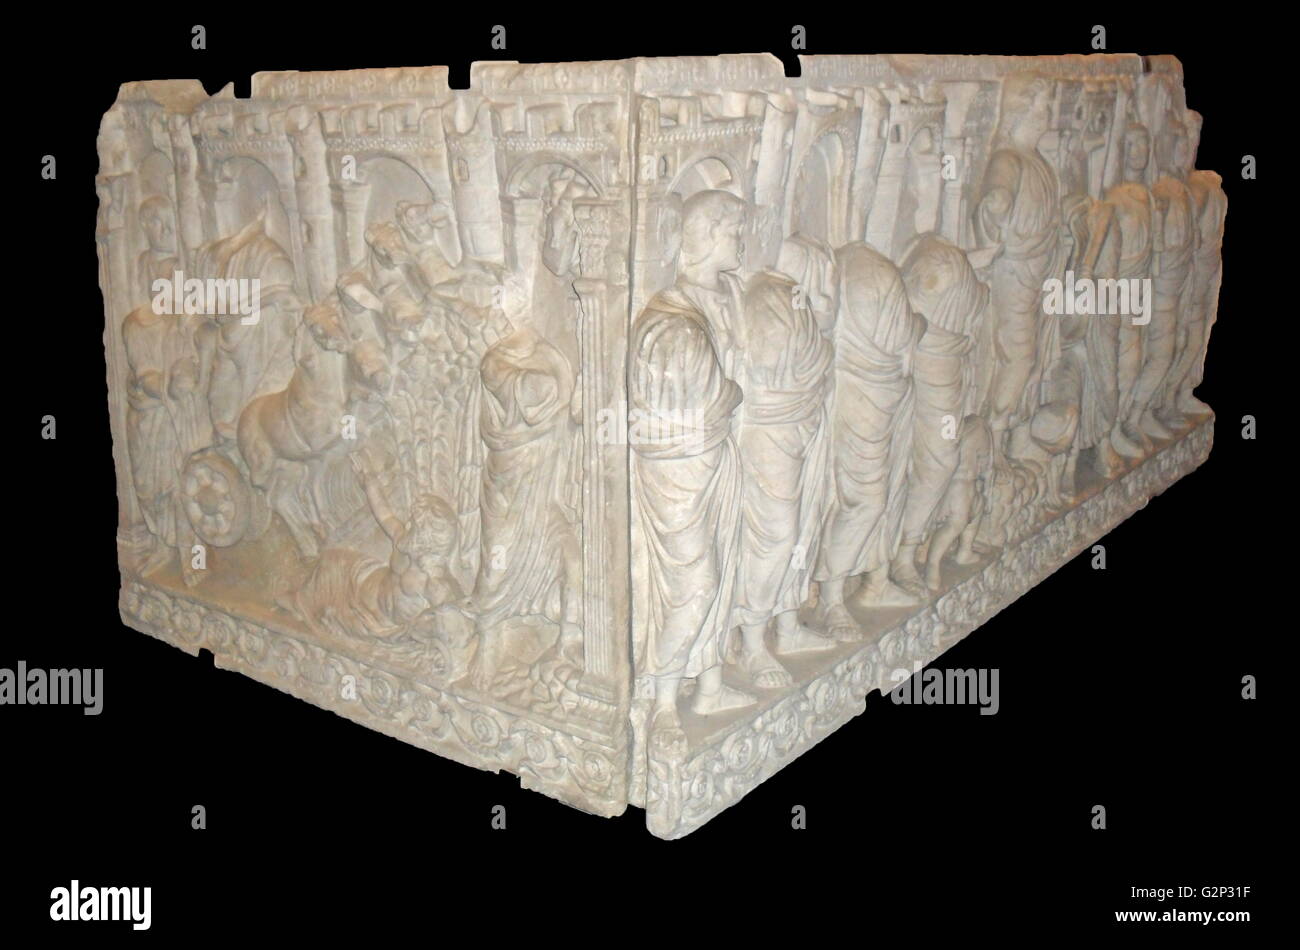 Roman Sarcophagus. Last decades of the 4th century. Detailed with a relief of crenelated towers, Christ and his followers, and Moses receiving the 10 commandments. Stock Photo